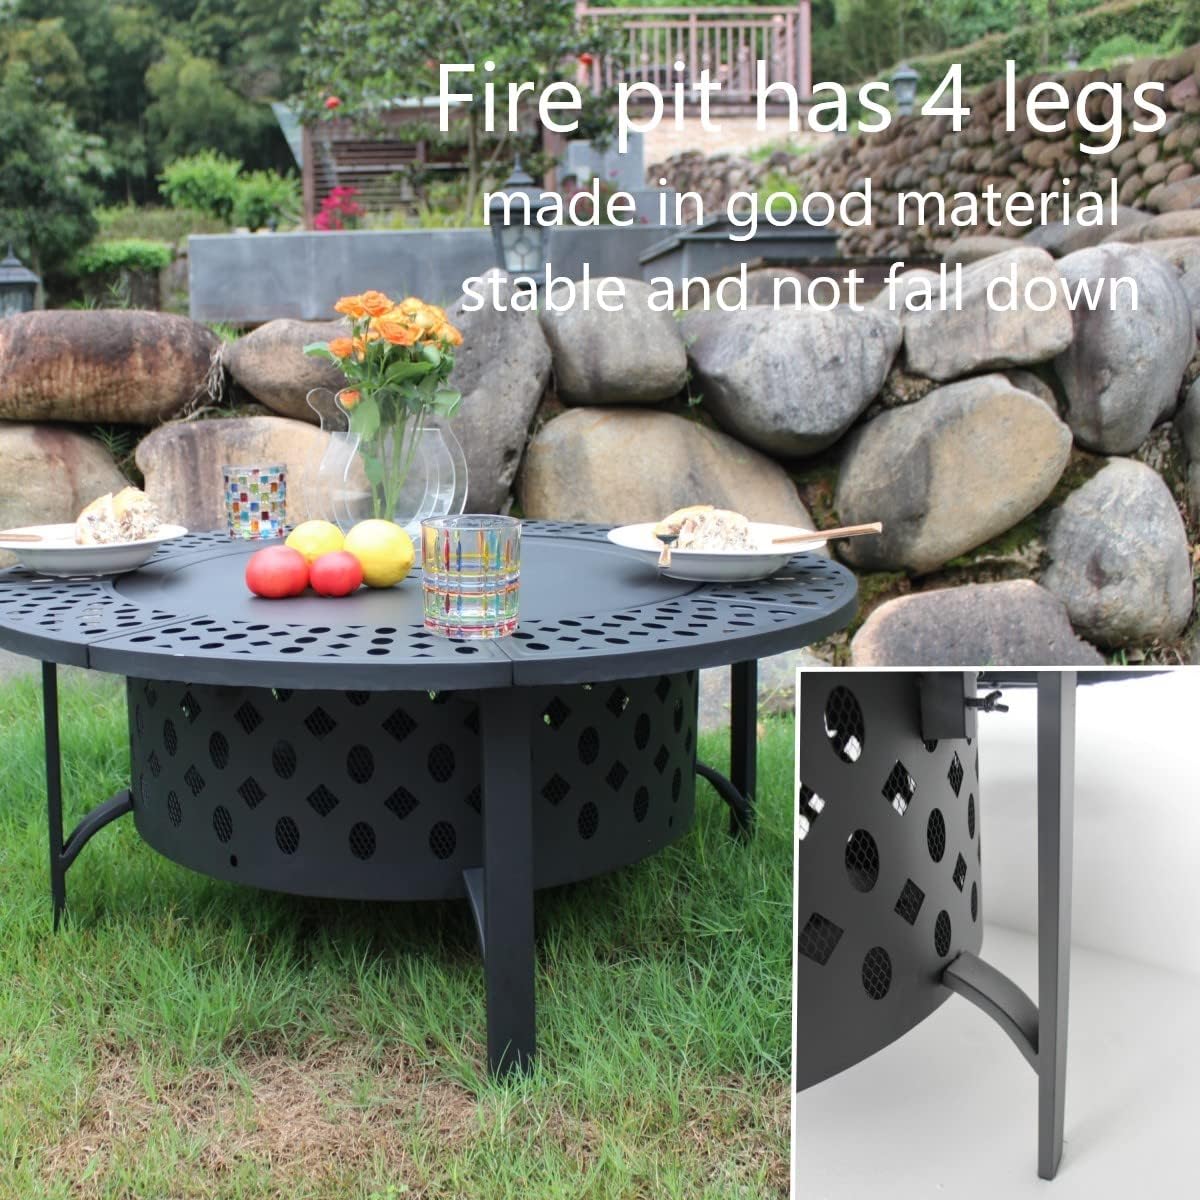 OutVue 36 Inch Fire Pit Review